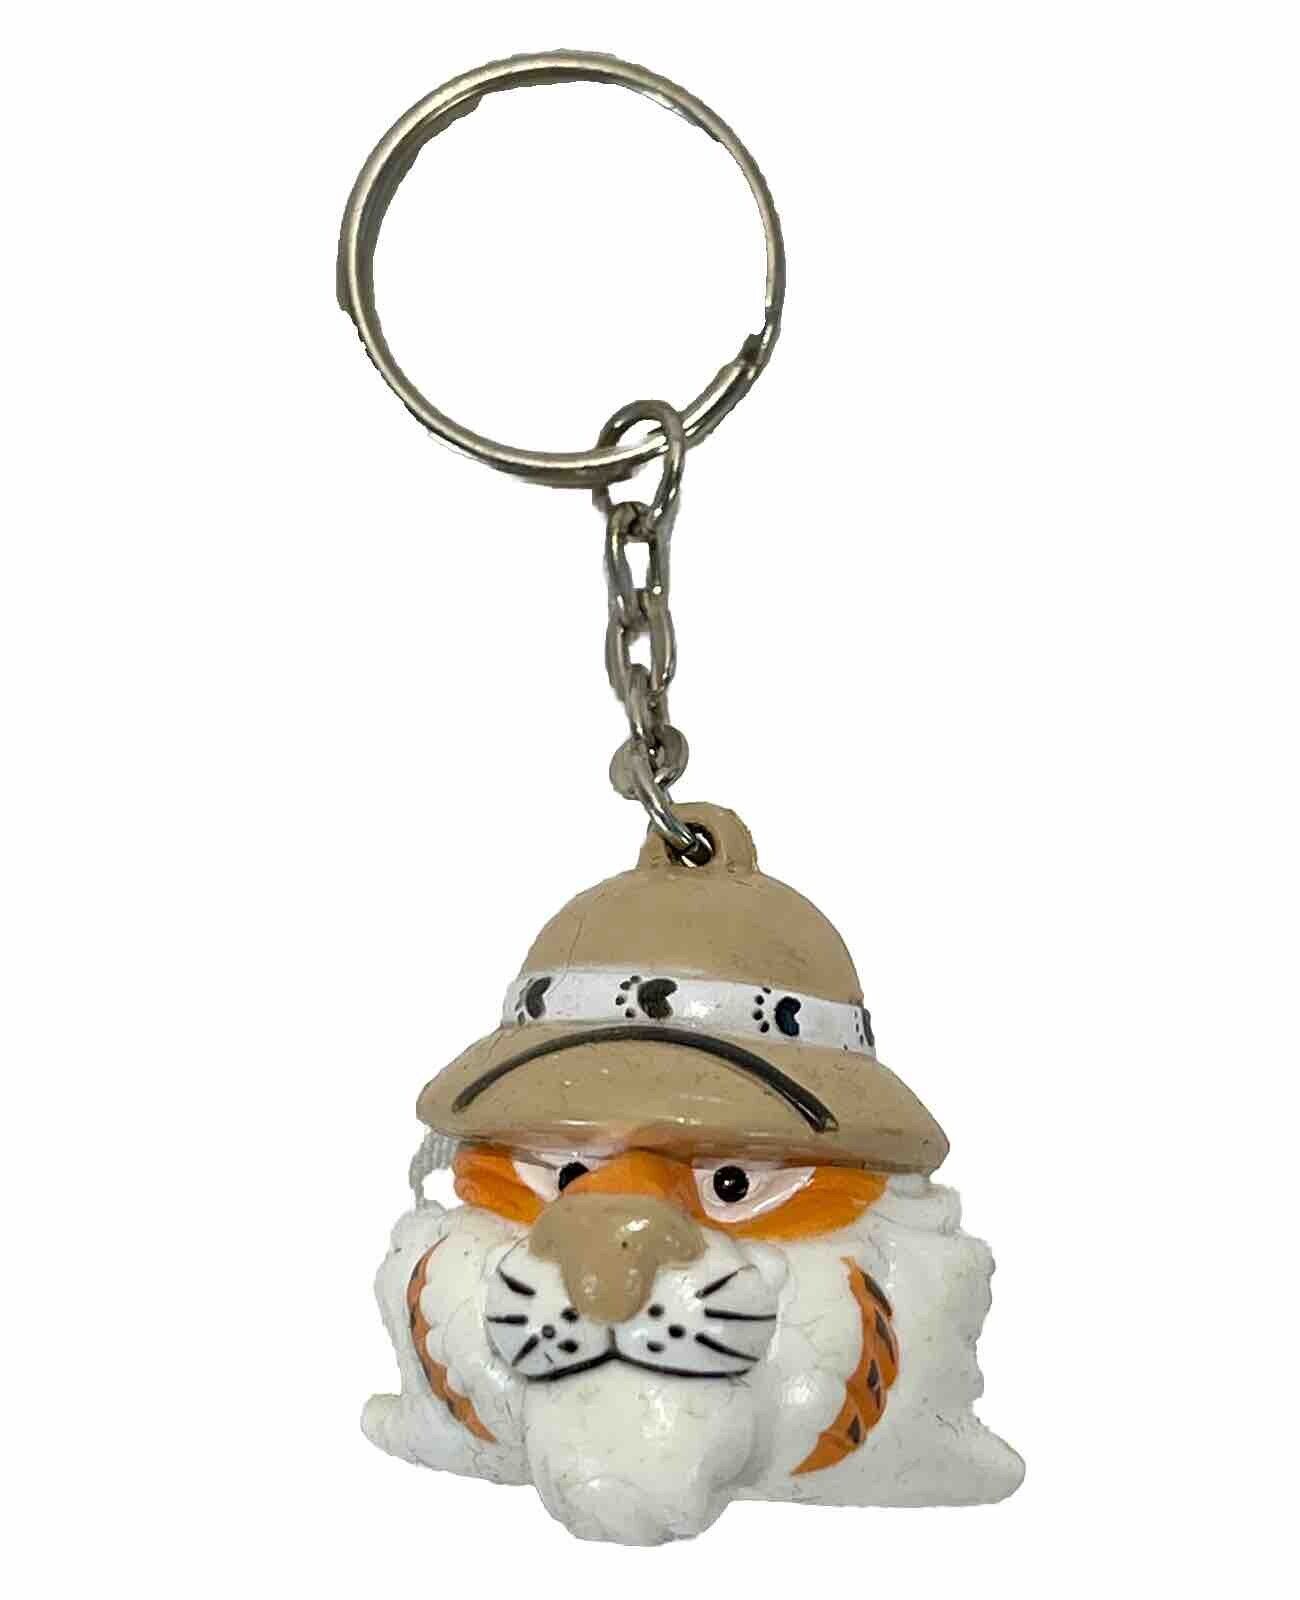 1997 EXXON ESSO Put A Tiger In Your Tank Promotional Key Chain Ring Vintage